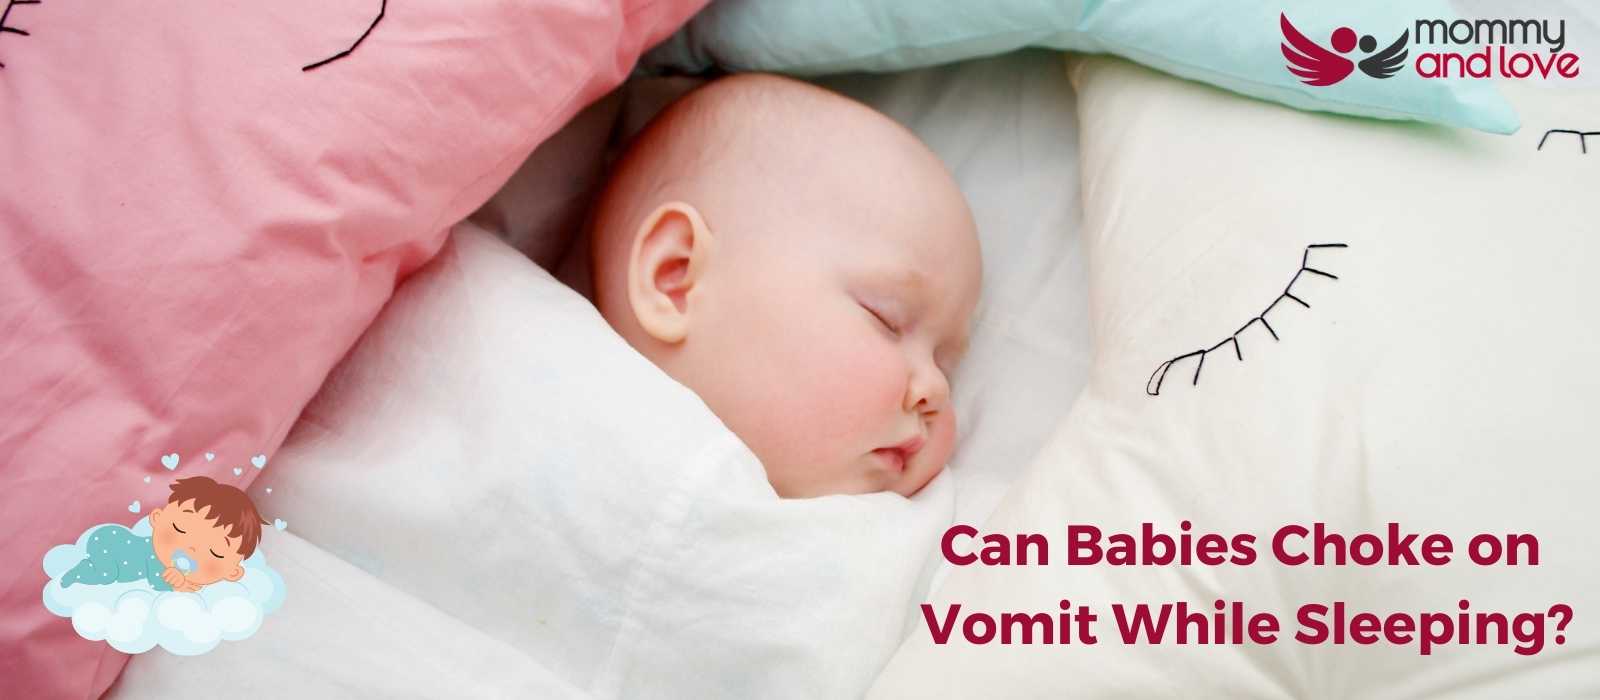 Can Babies Choke on Vomit While Sleeping